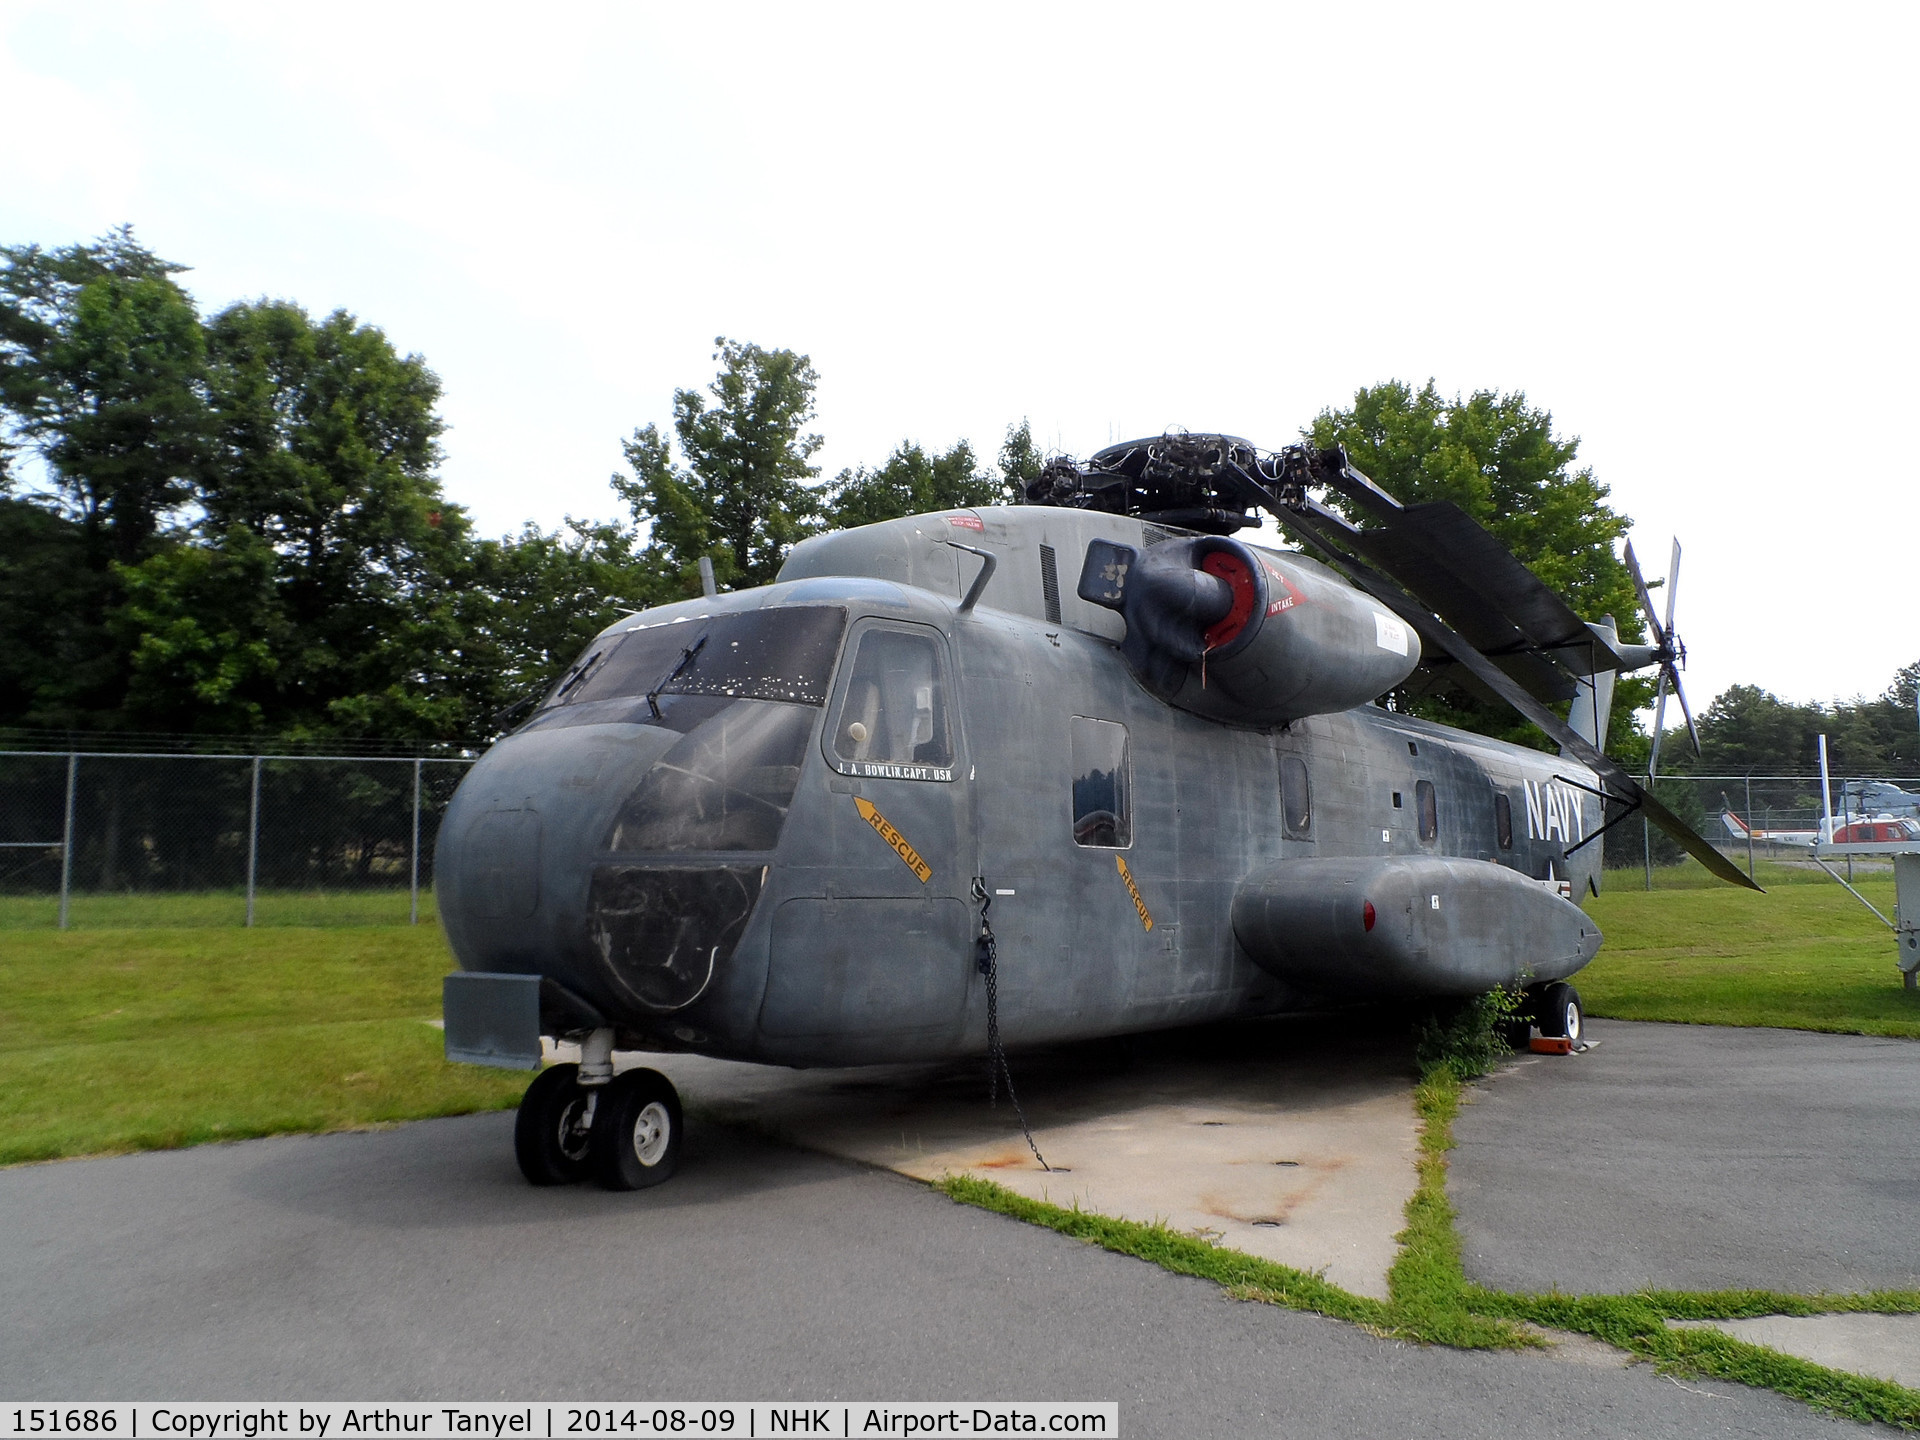 151686, Sikorsky CH-53A Super Stallion C/N 65-003, On display @ the Patuxent River Naval Air Museum